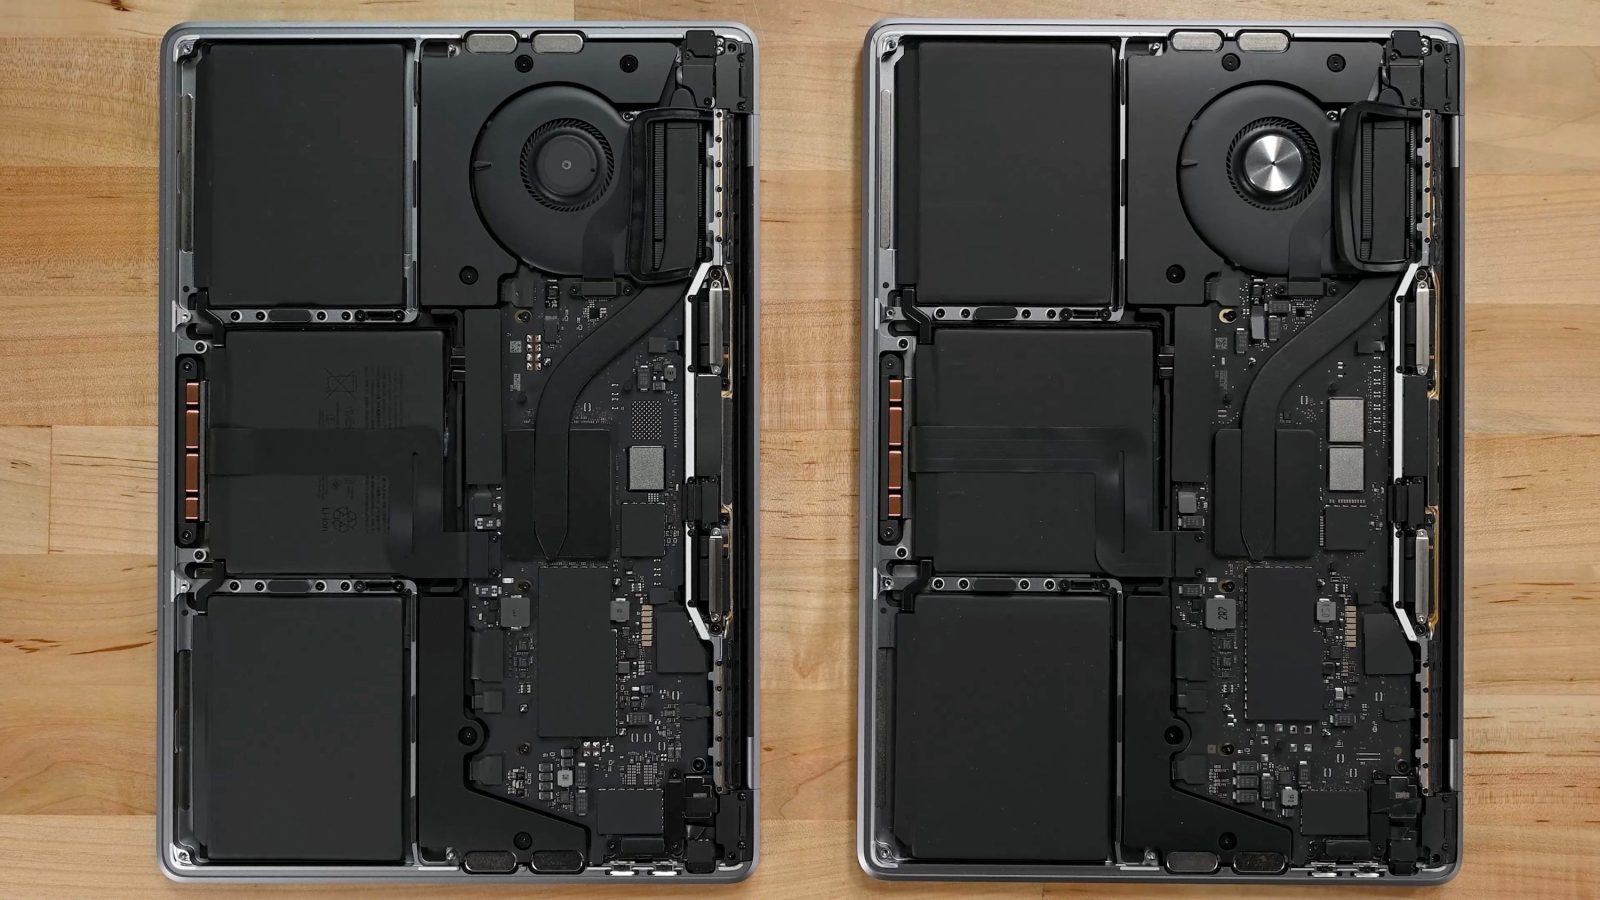 iFixit teardown shows M2 MacBook Pro is just a recycled laptop with a new chip inside